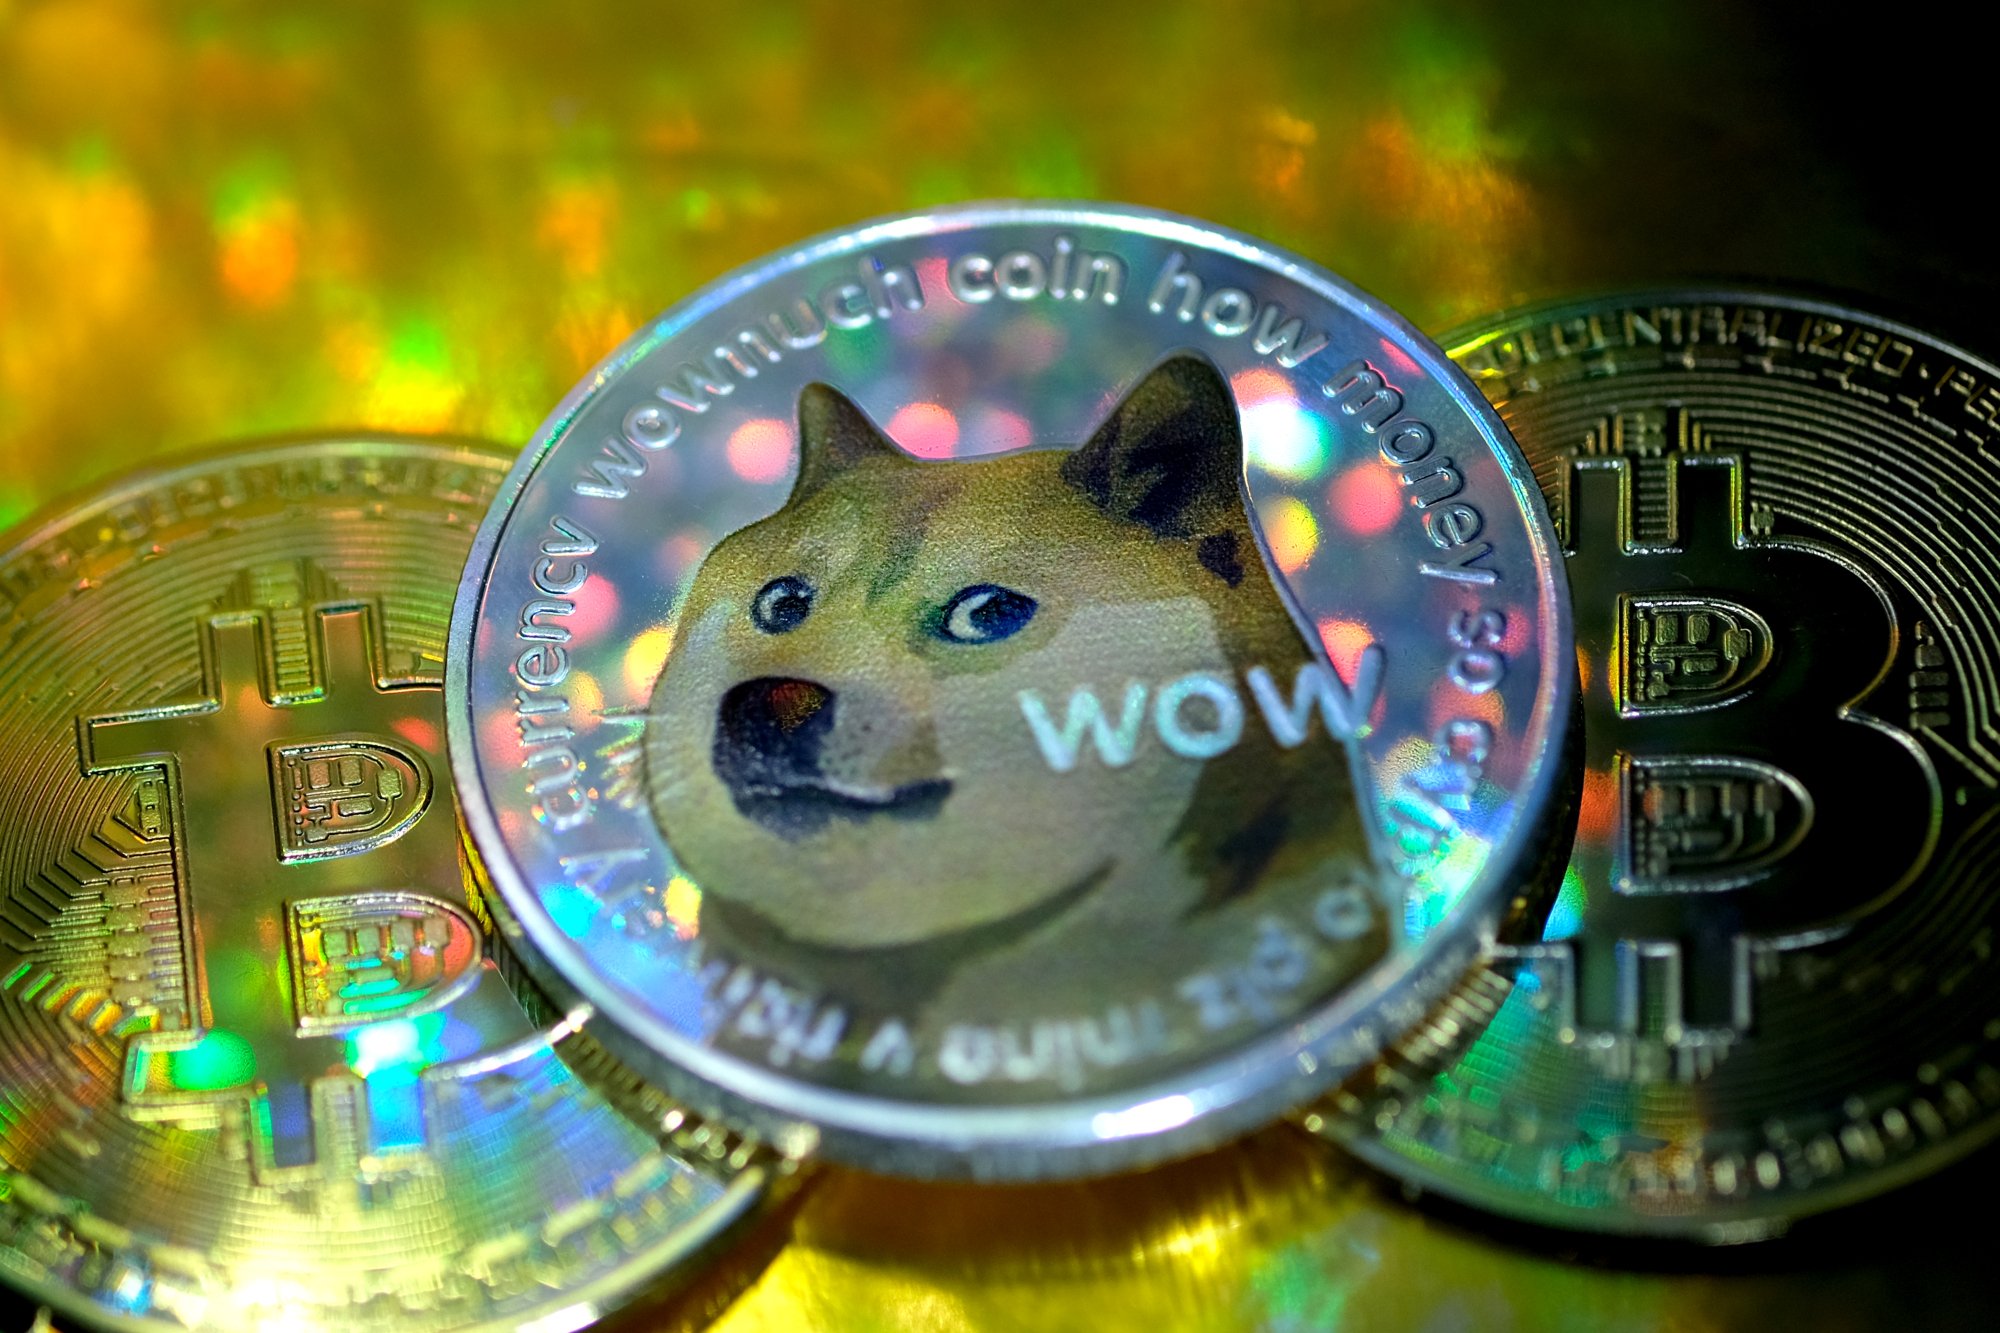 A quarter-sized coin bearing the face of Kabosu the Shiba Inu with "wow" written in comic sans.